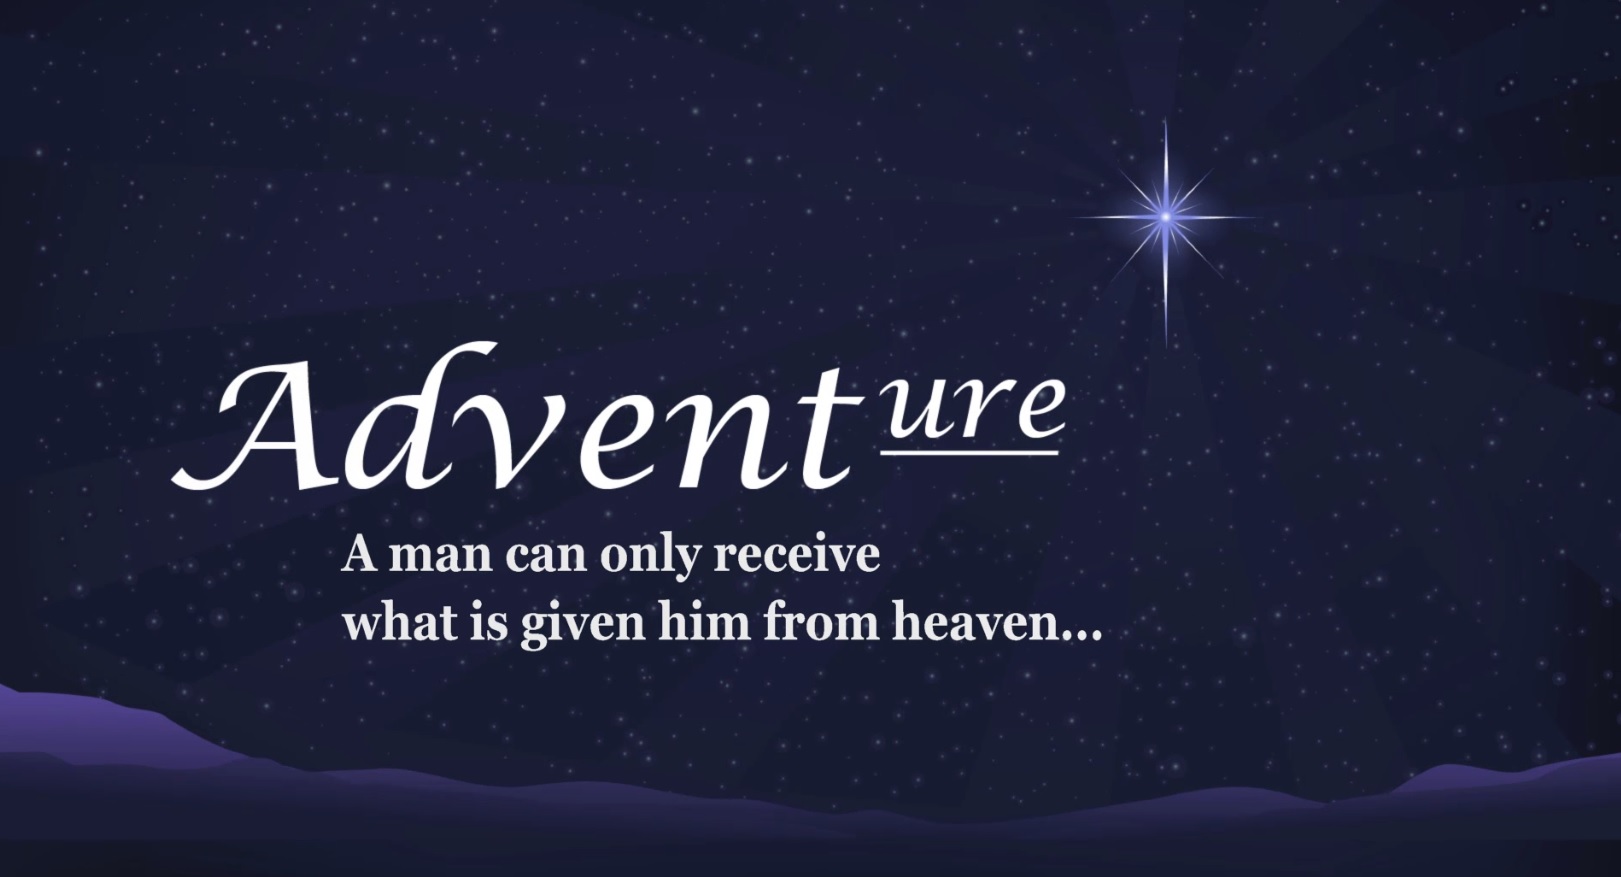 Advent: a man can only receive…